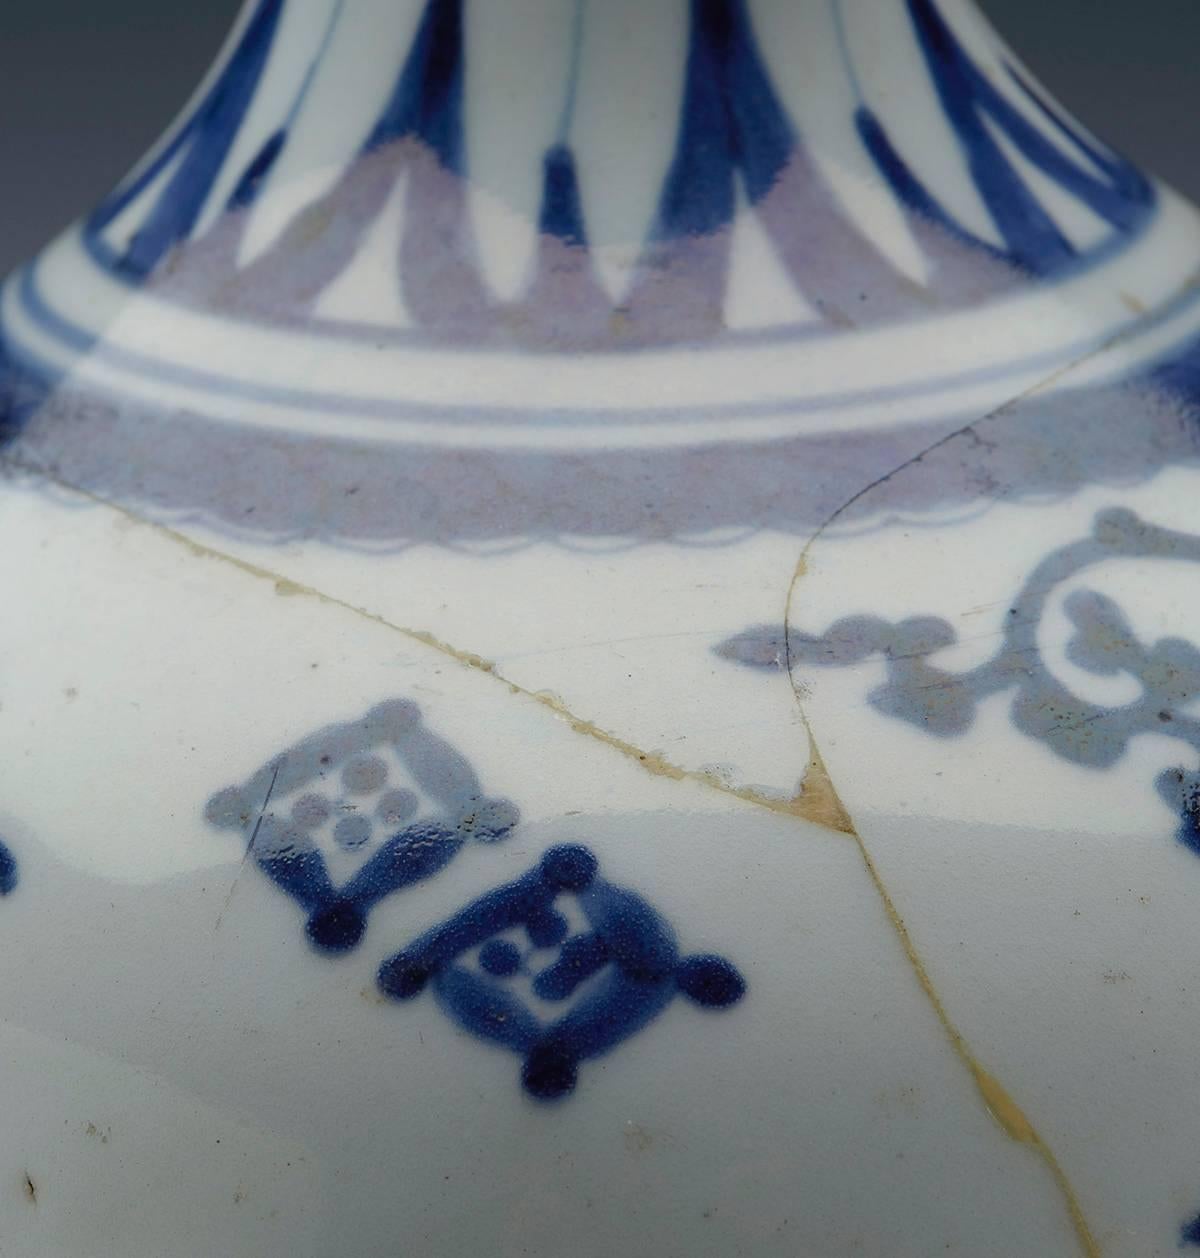 18th Century and Earlier Antique Japanese Imari Porcelain Blue and White Vase, 17th Century